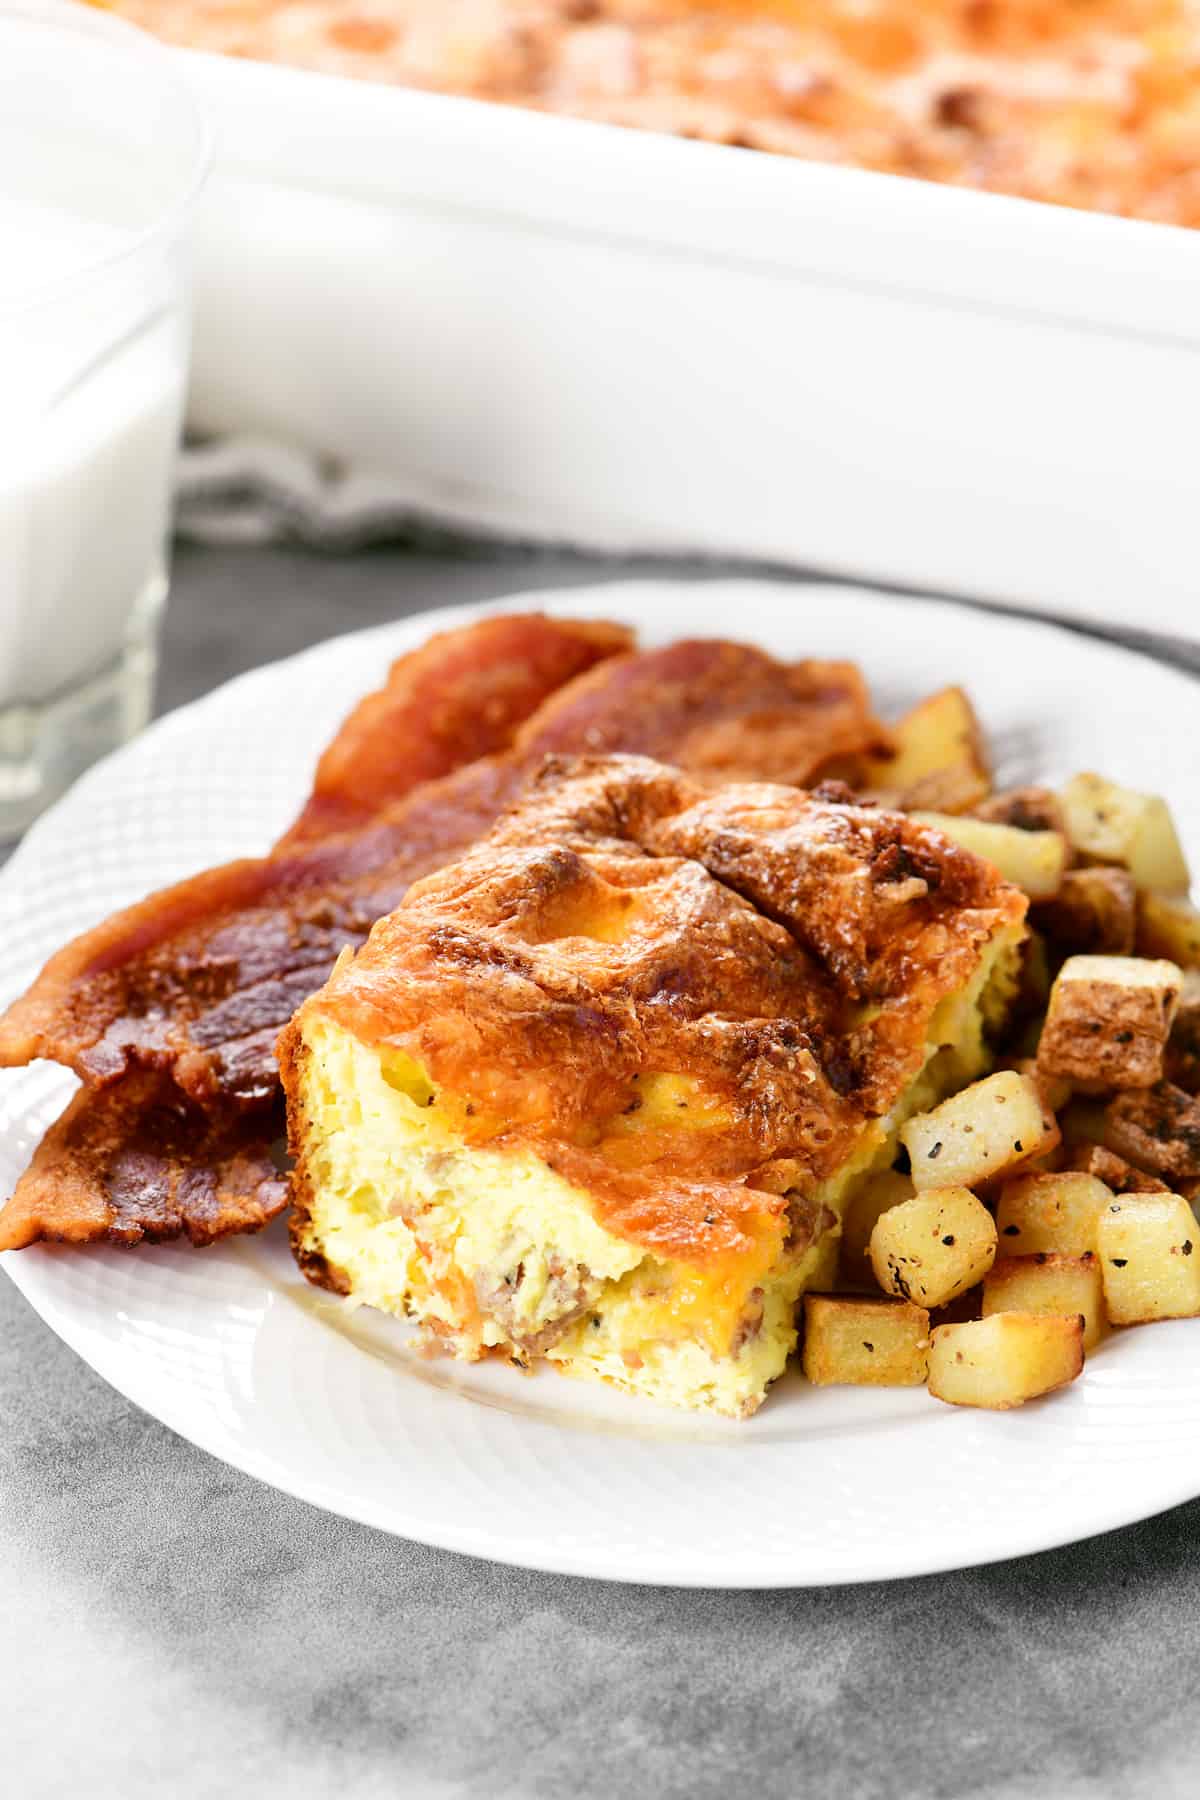 breakfast casserole on a plate with potatoes and bacon.